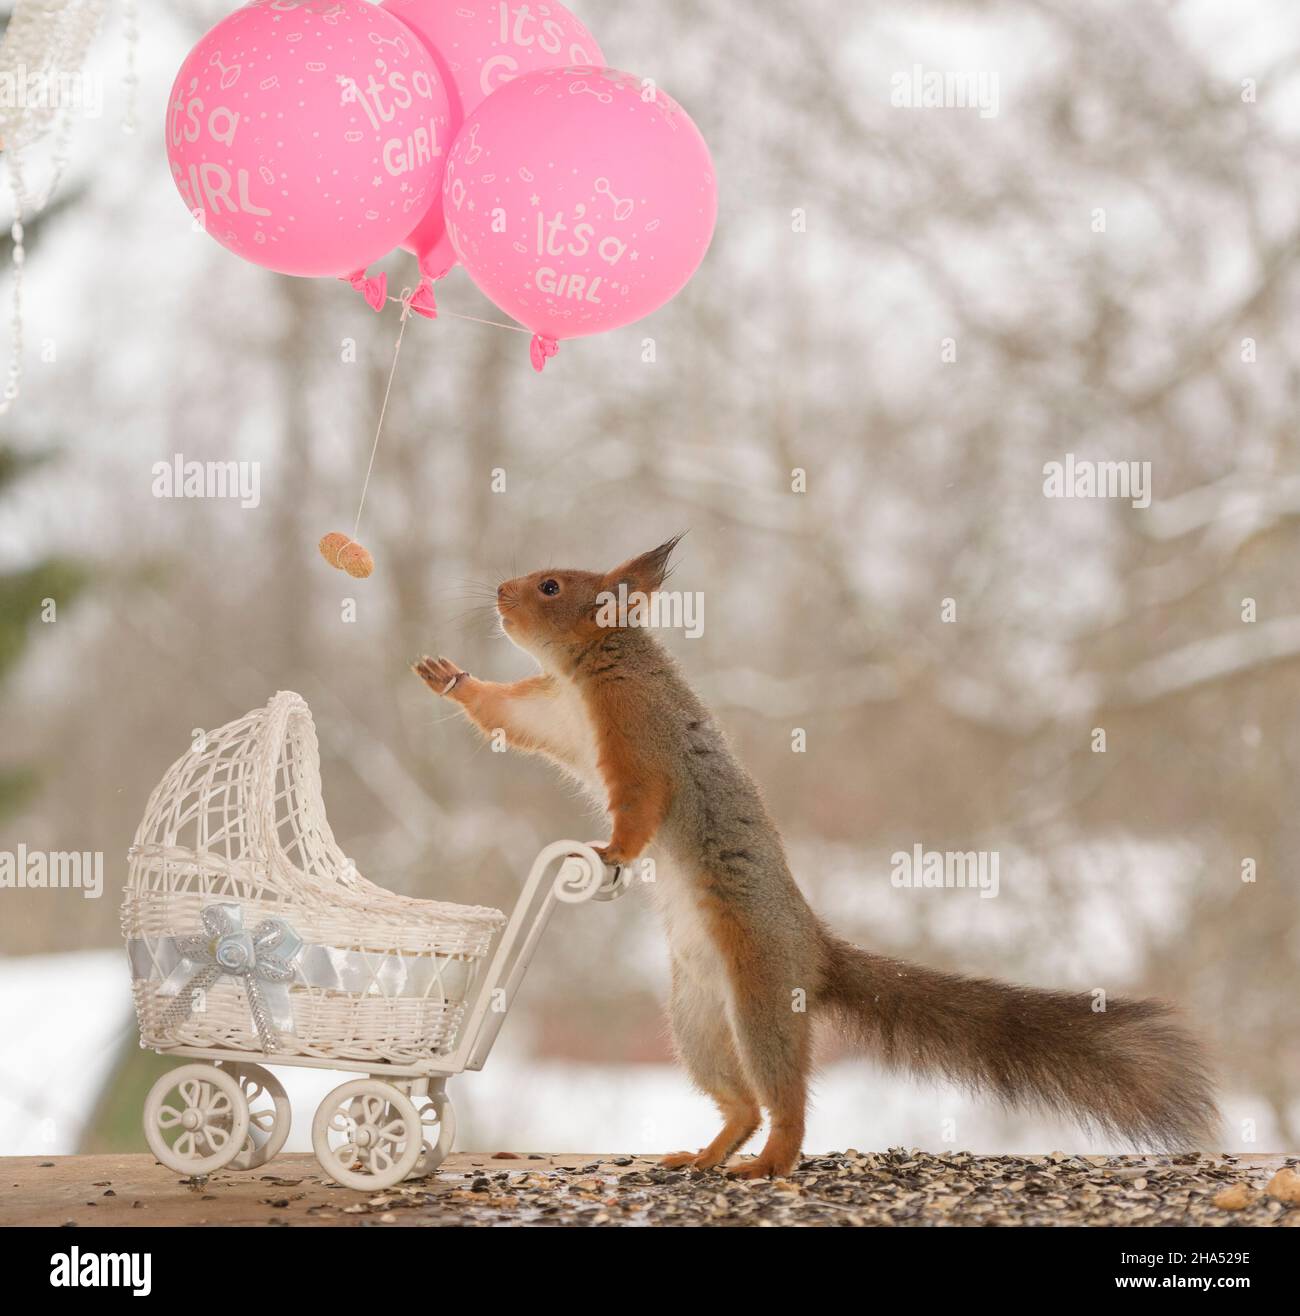 red squirrel with an stroller is reaching an balloon Stock Photo